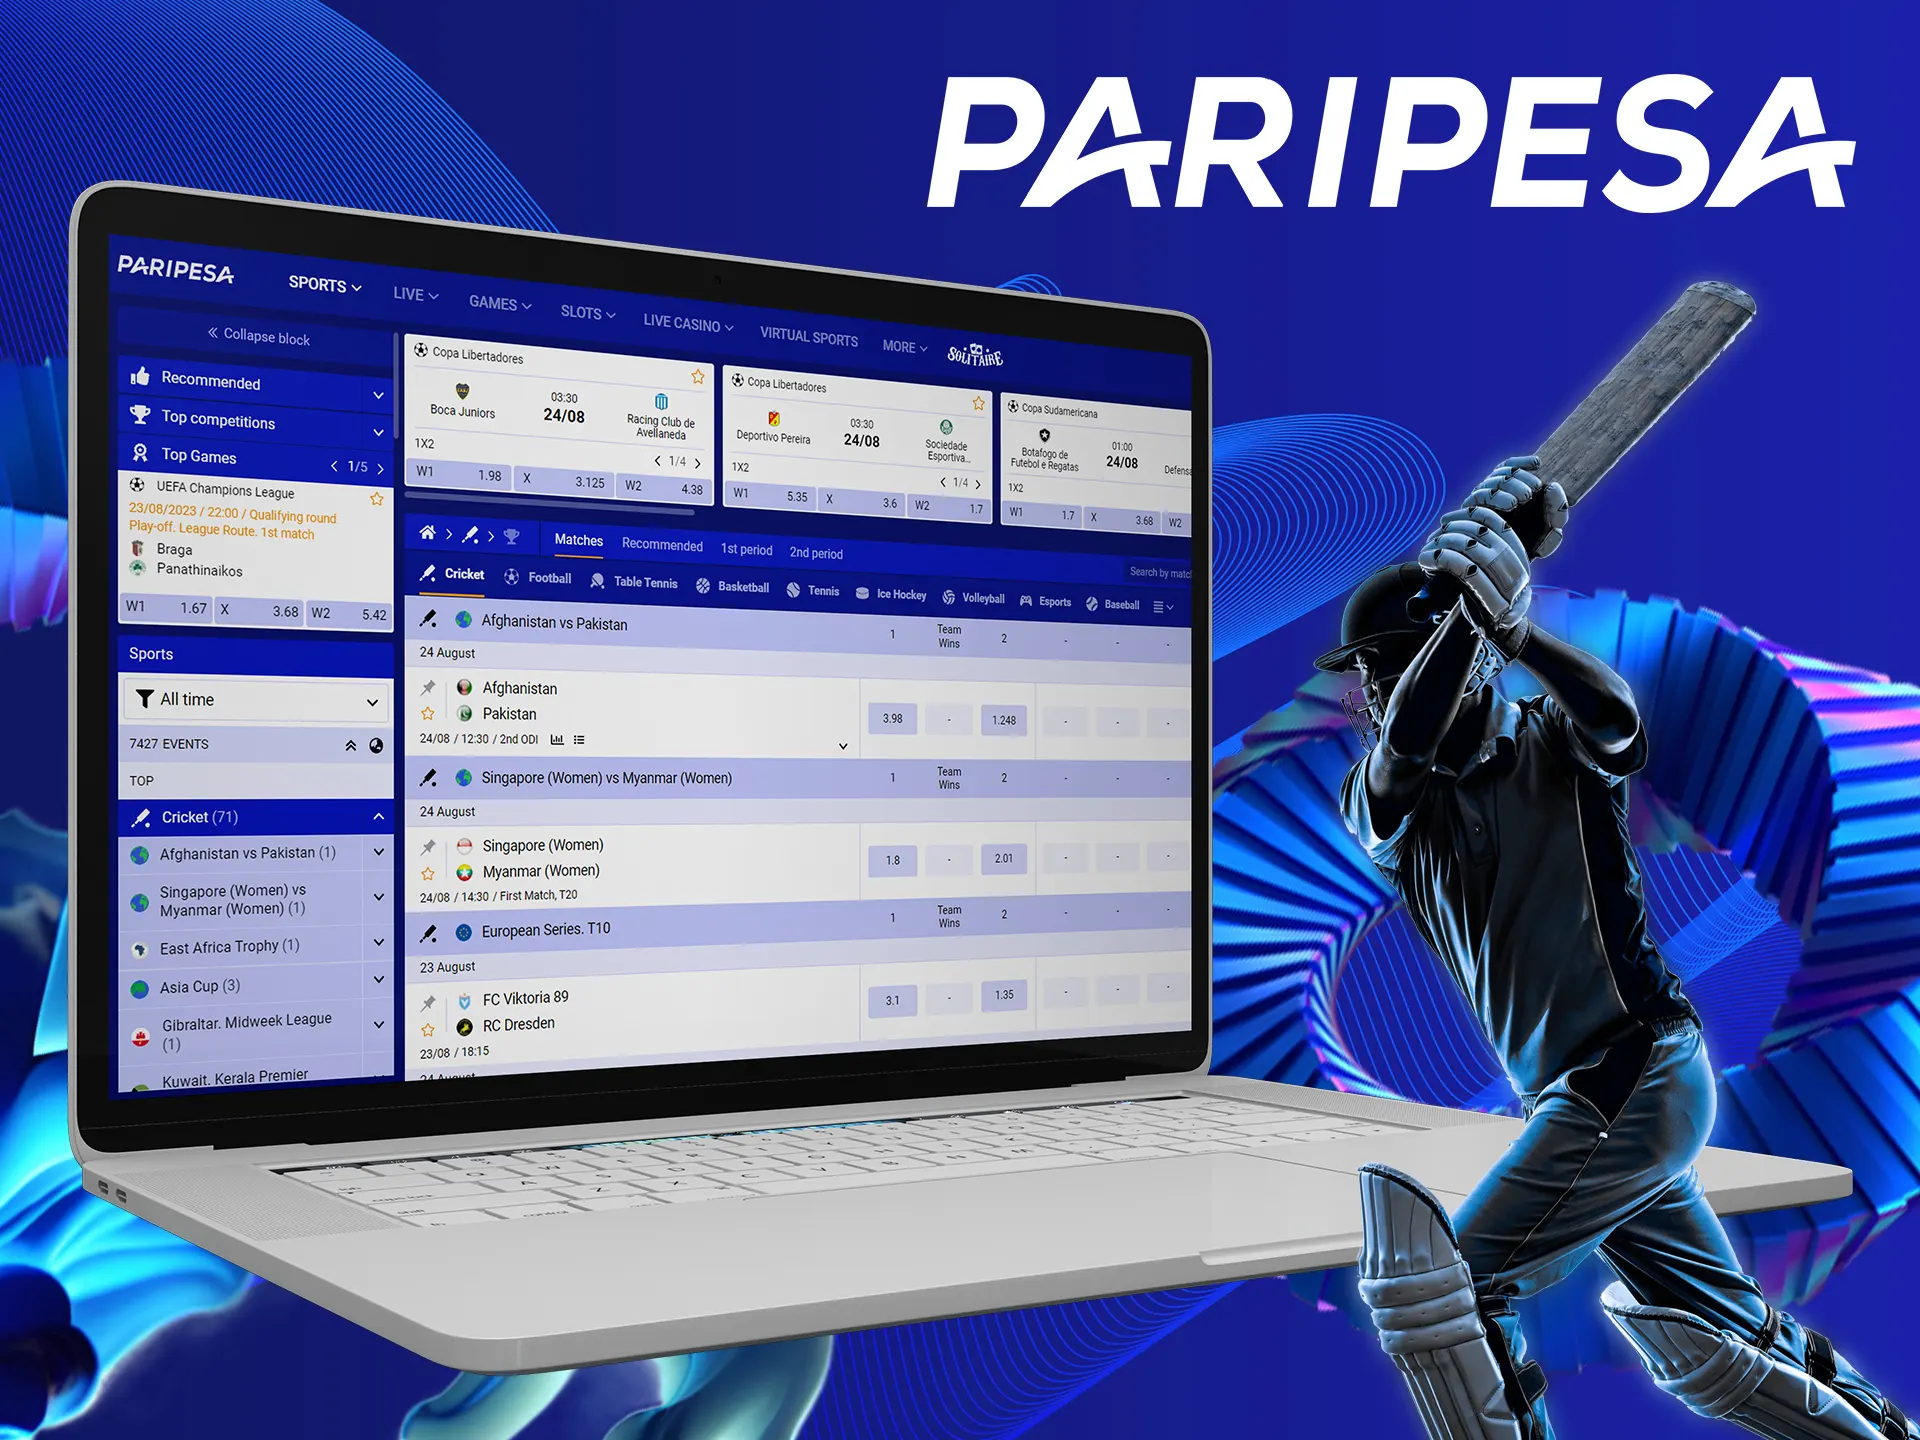 Make bets on cricket on the special Paripesa sports page.